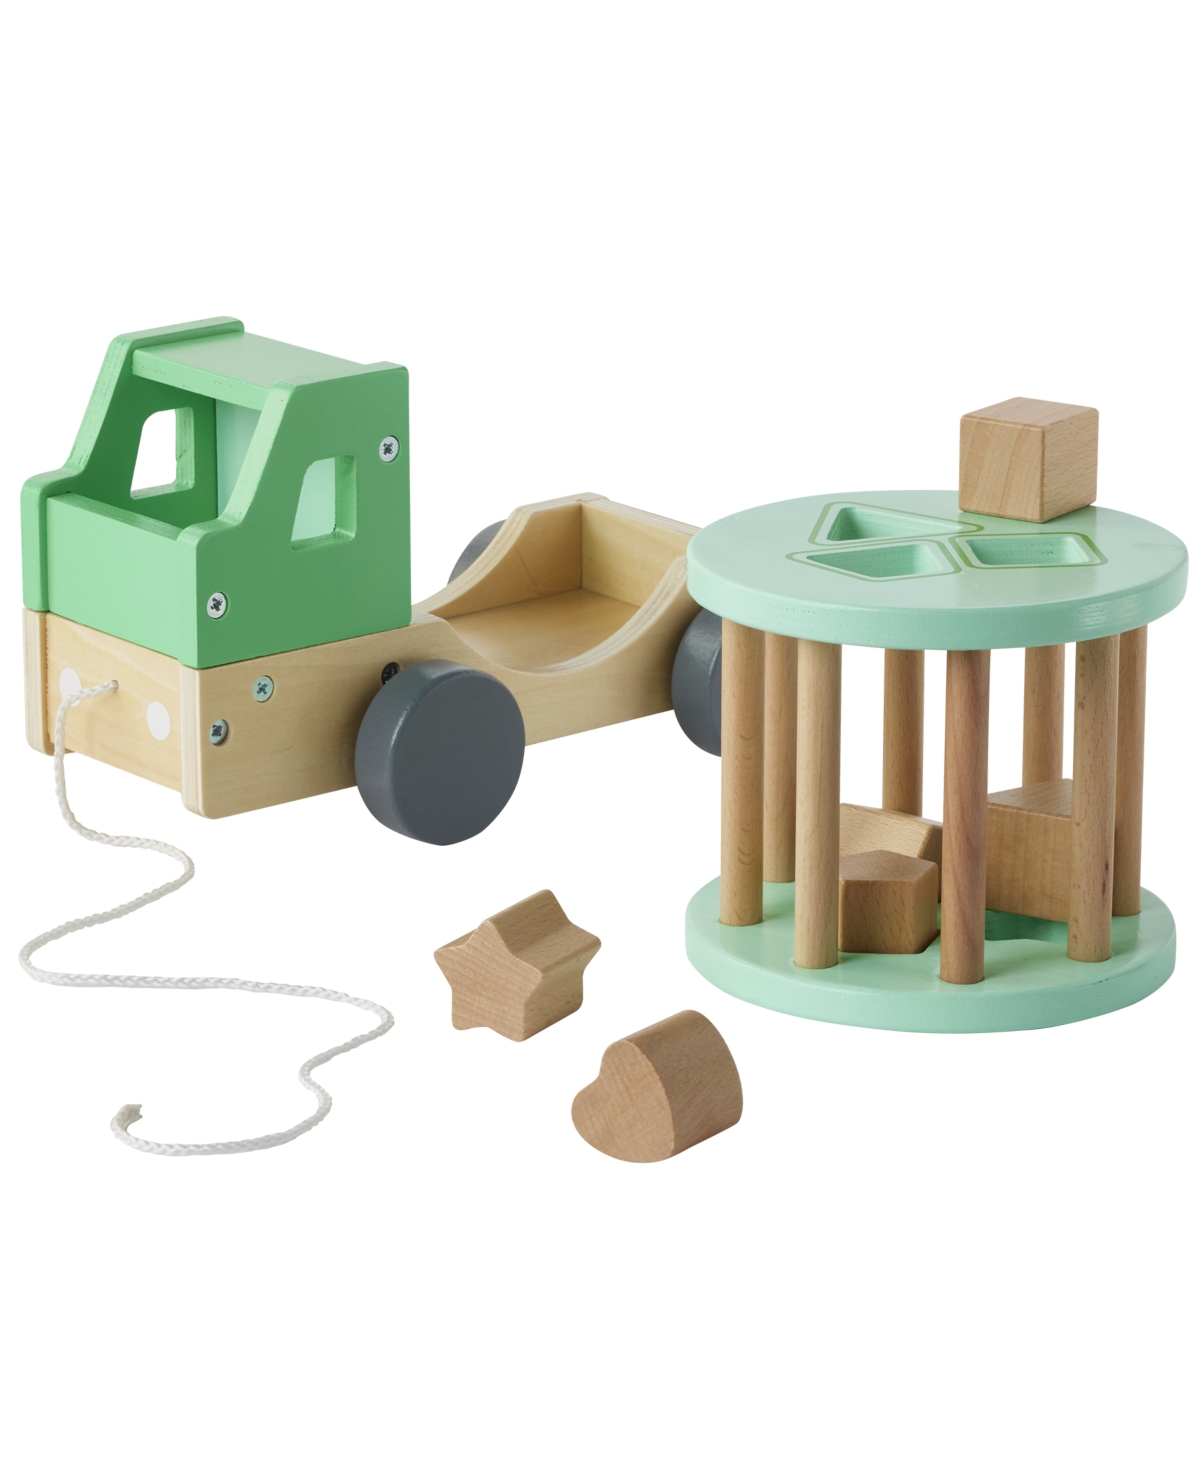 Imaginarium Shape Sorter Pull to Play Blocks, Created for You by Toys R Us